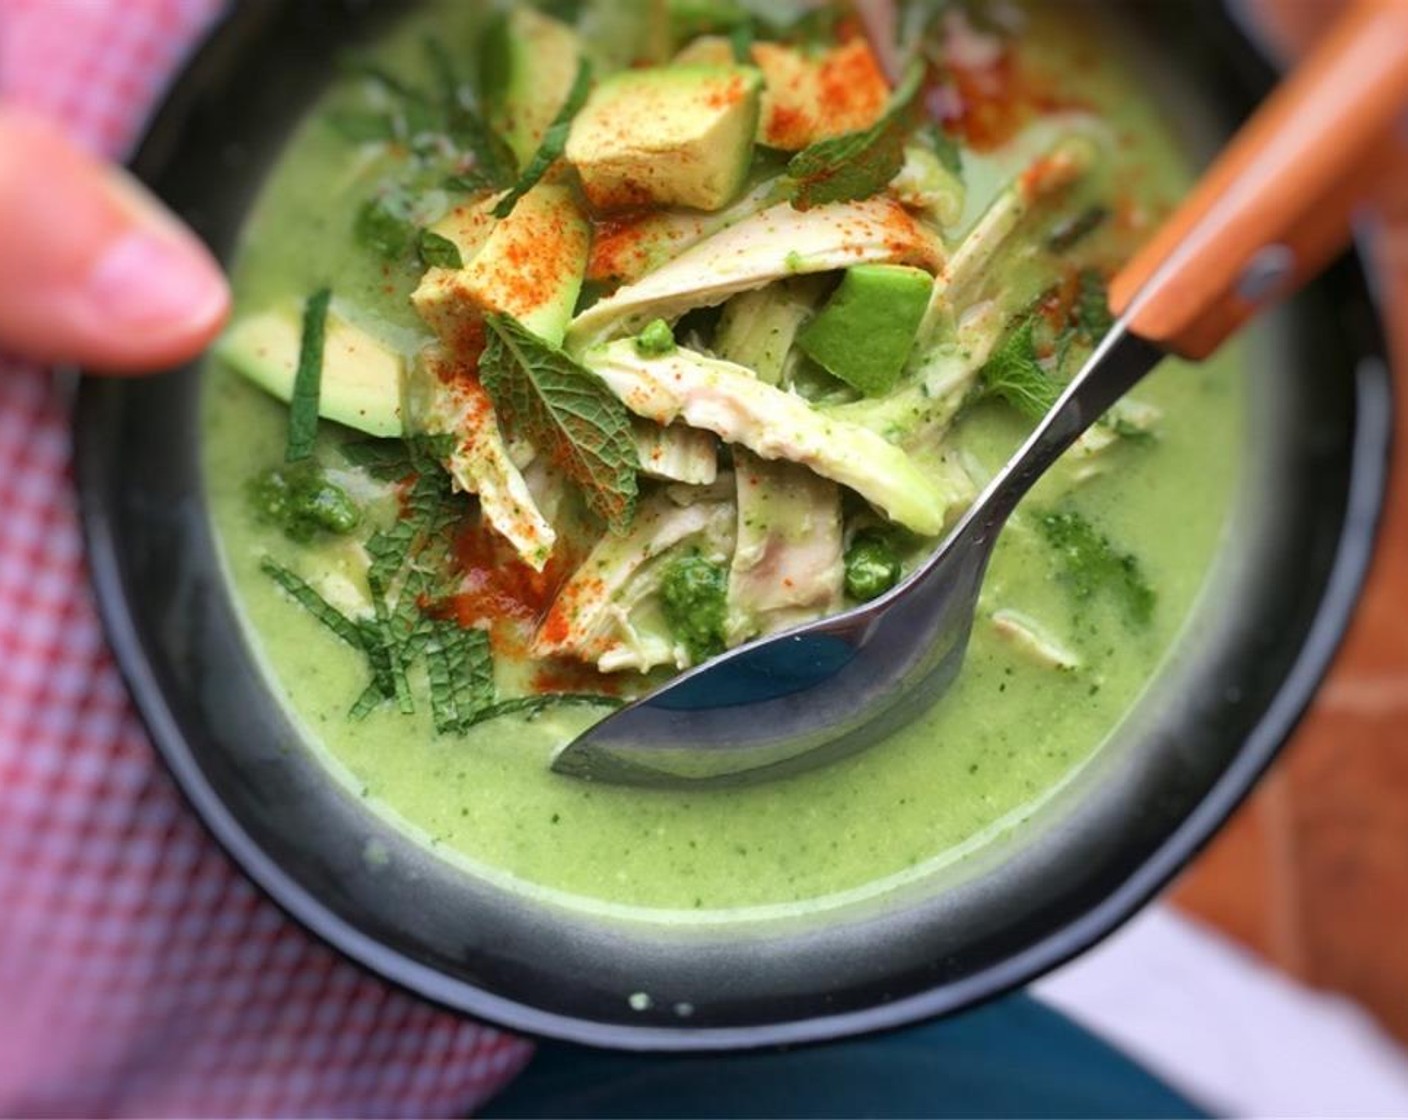 step 8 Take the pan off the heat and scoop the avocado chicken soup into large bowls. Serve hot and enjoy!